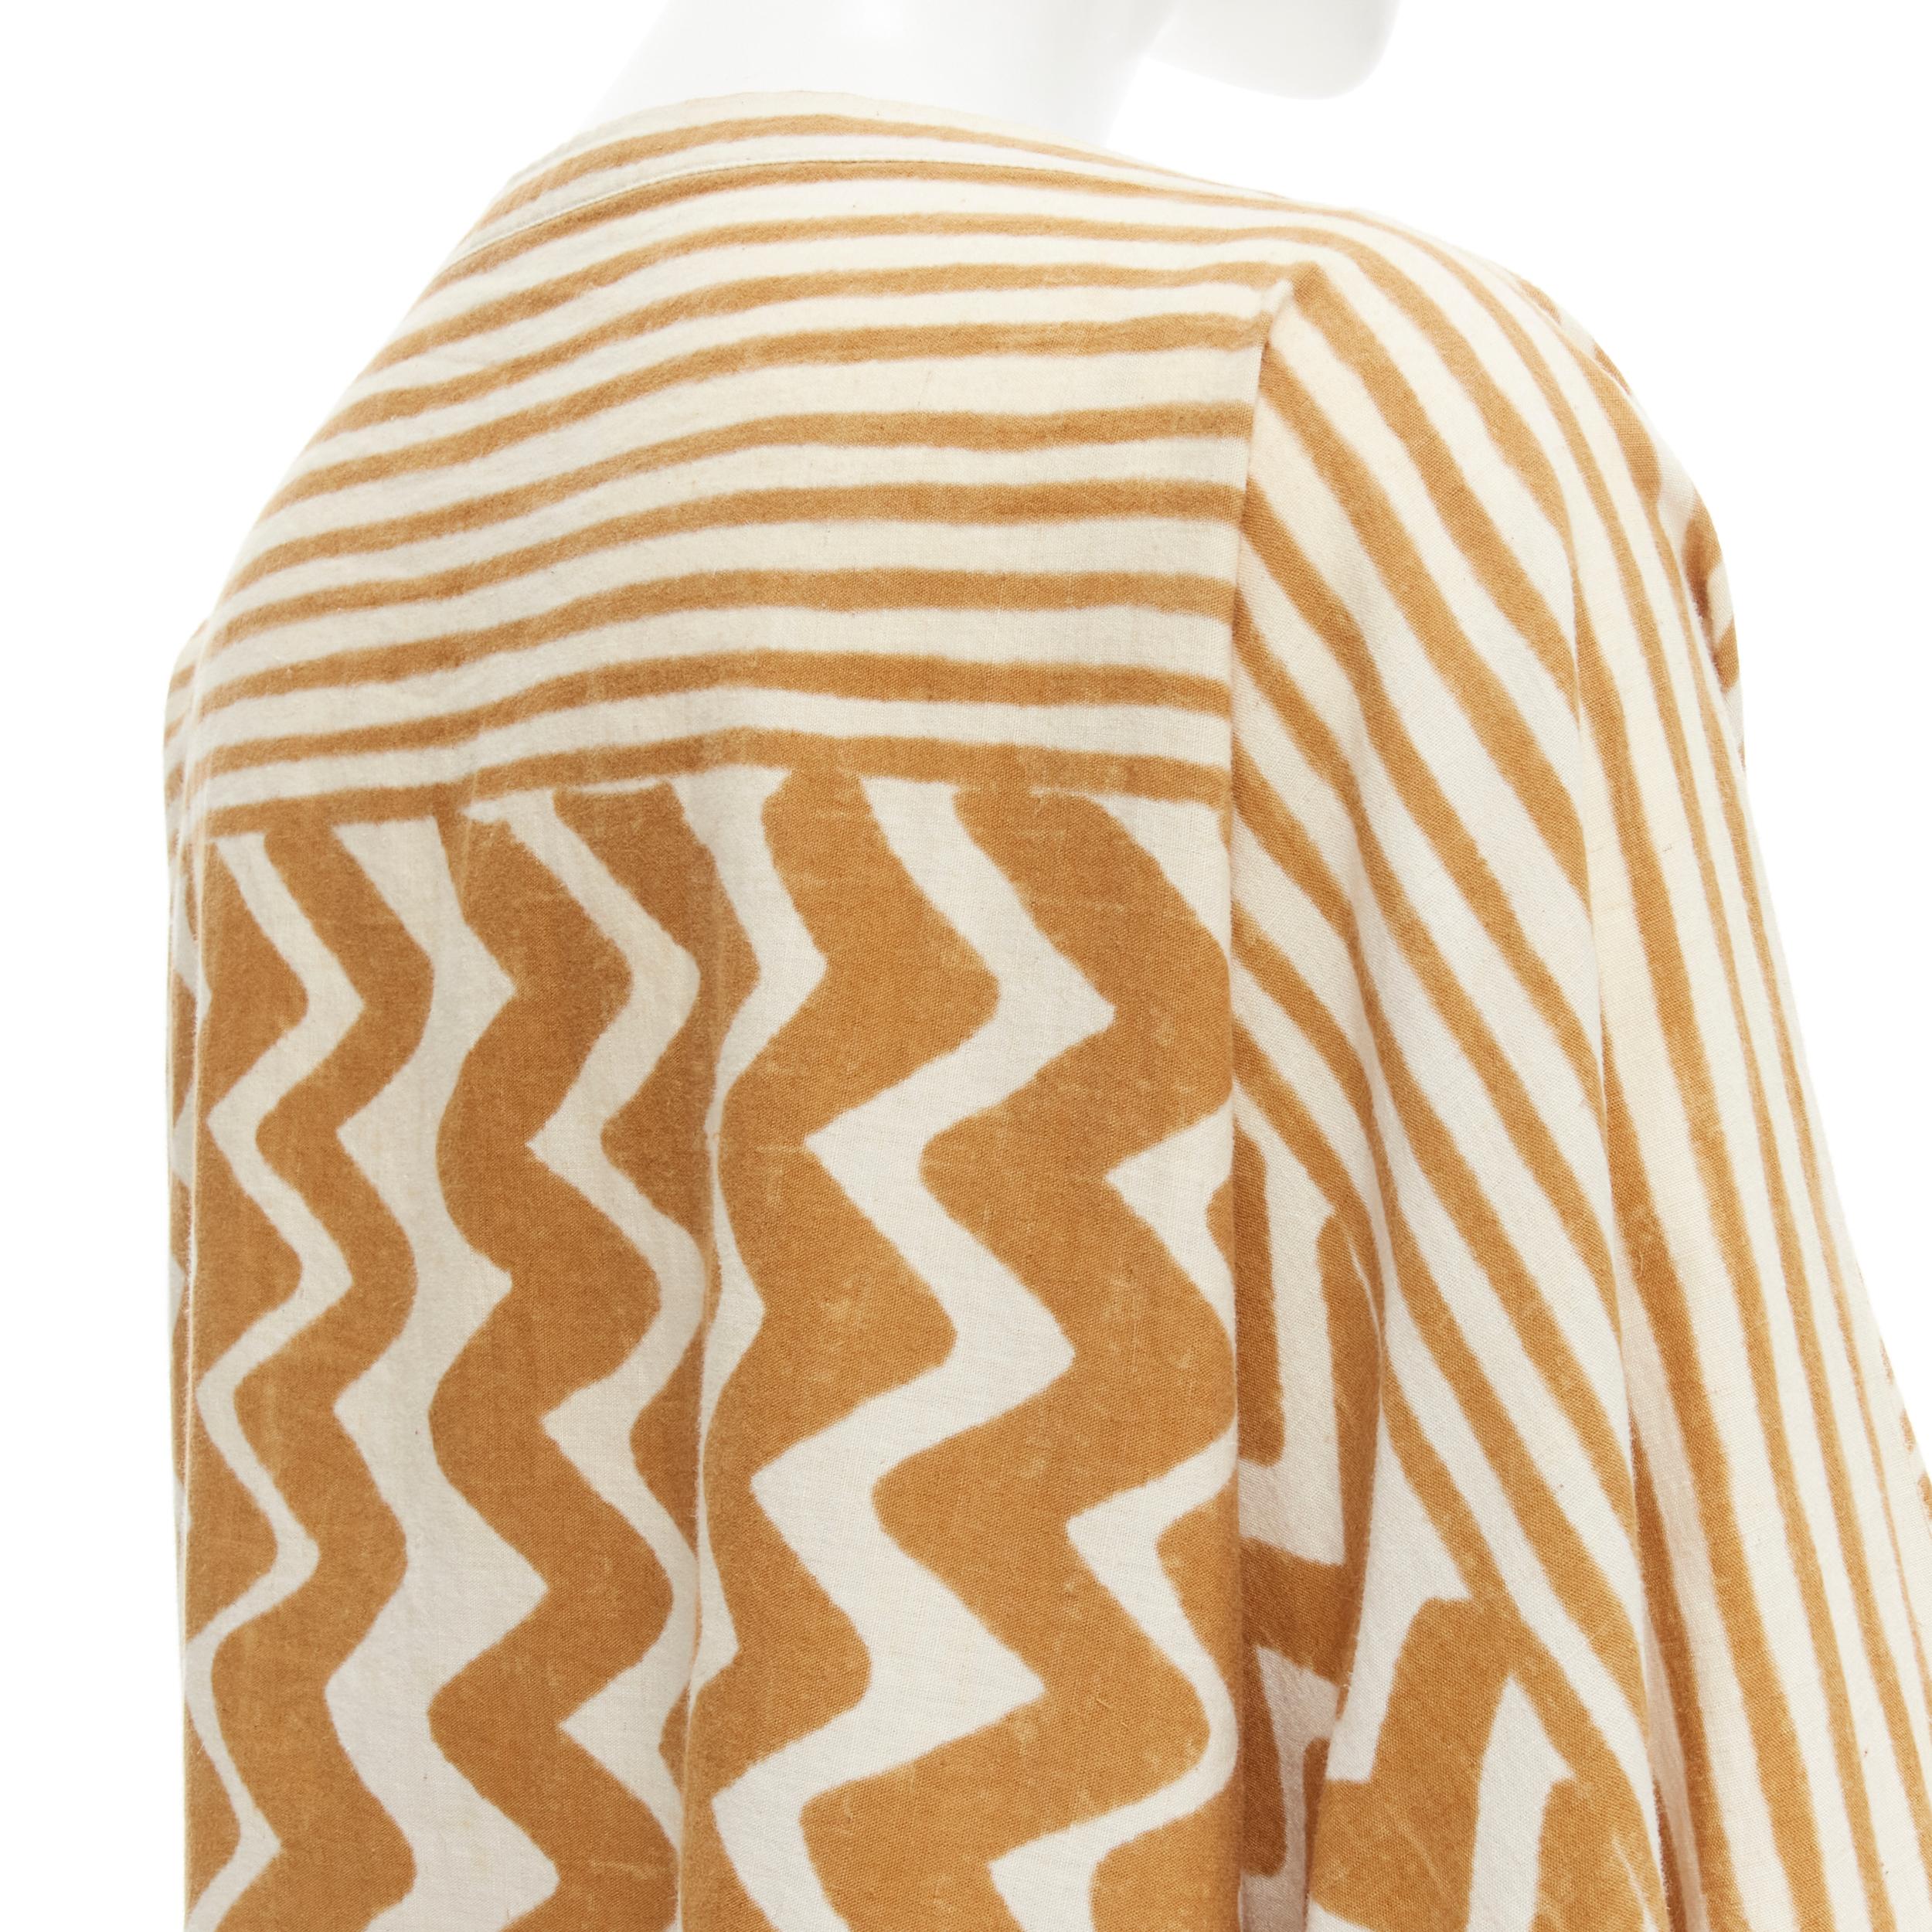 ISSEY MIYAKE 1980's Vintage beige yellow tribal stripe boxy top skirt set For Sale 2